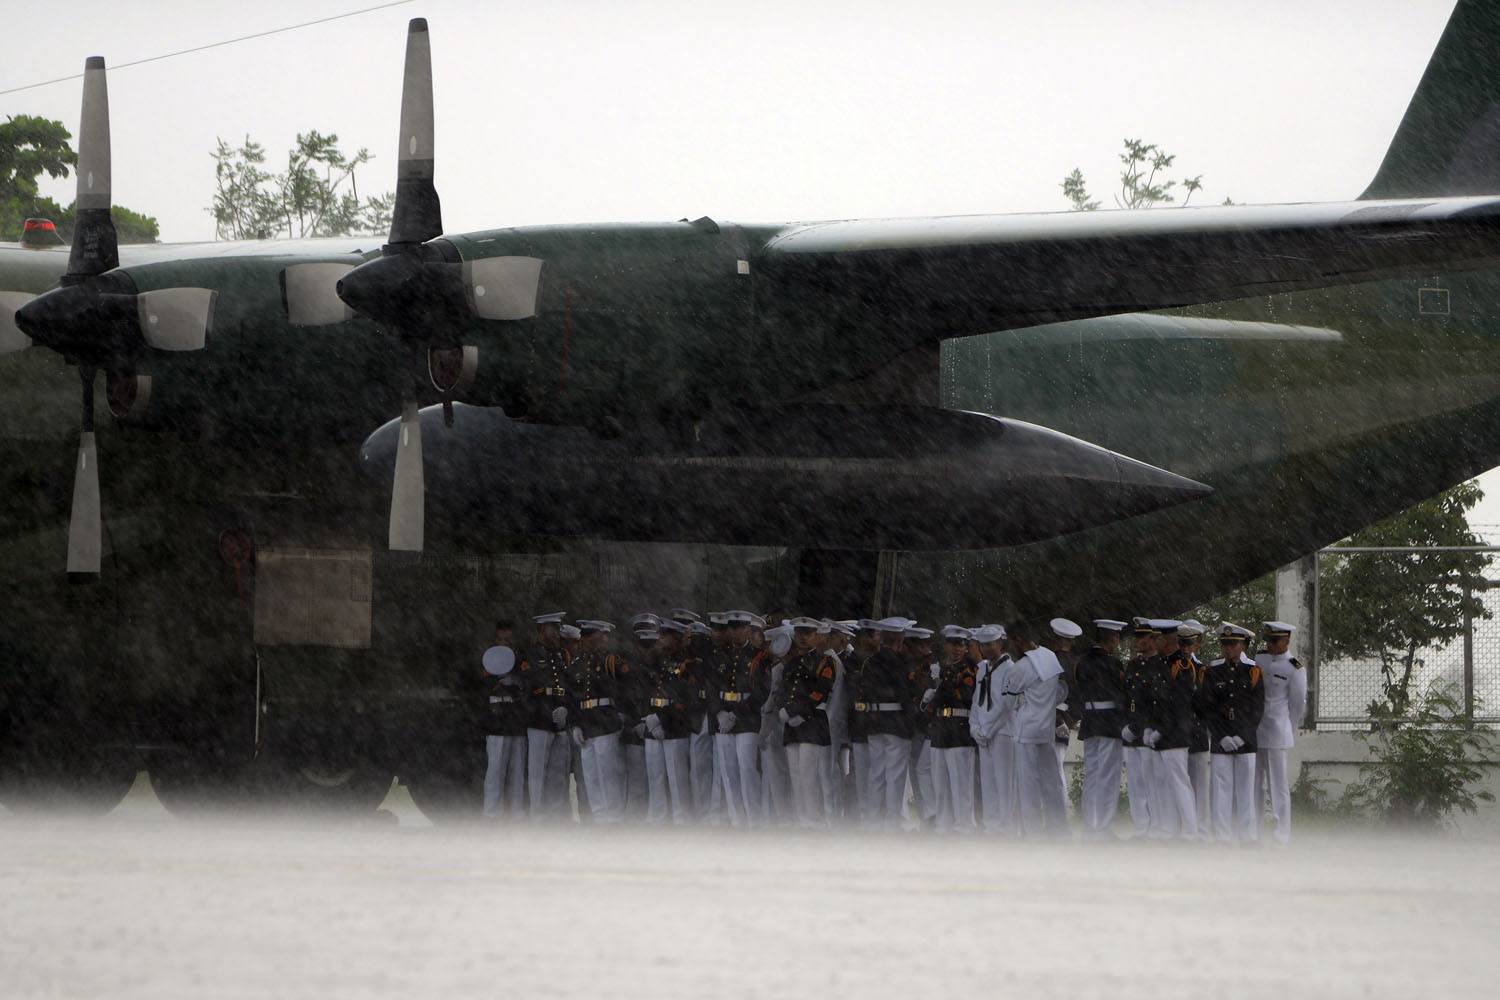 May 26, 2013. Armed Forces of the Philippines (AFP) soldiers take cover from the rain under a C-130 military aircraft while waiting for the arrival of seven coffins of dead soldiers at the Villamor Airbase in Manila.